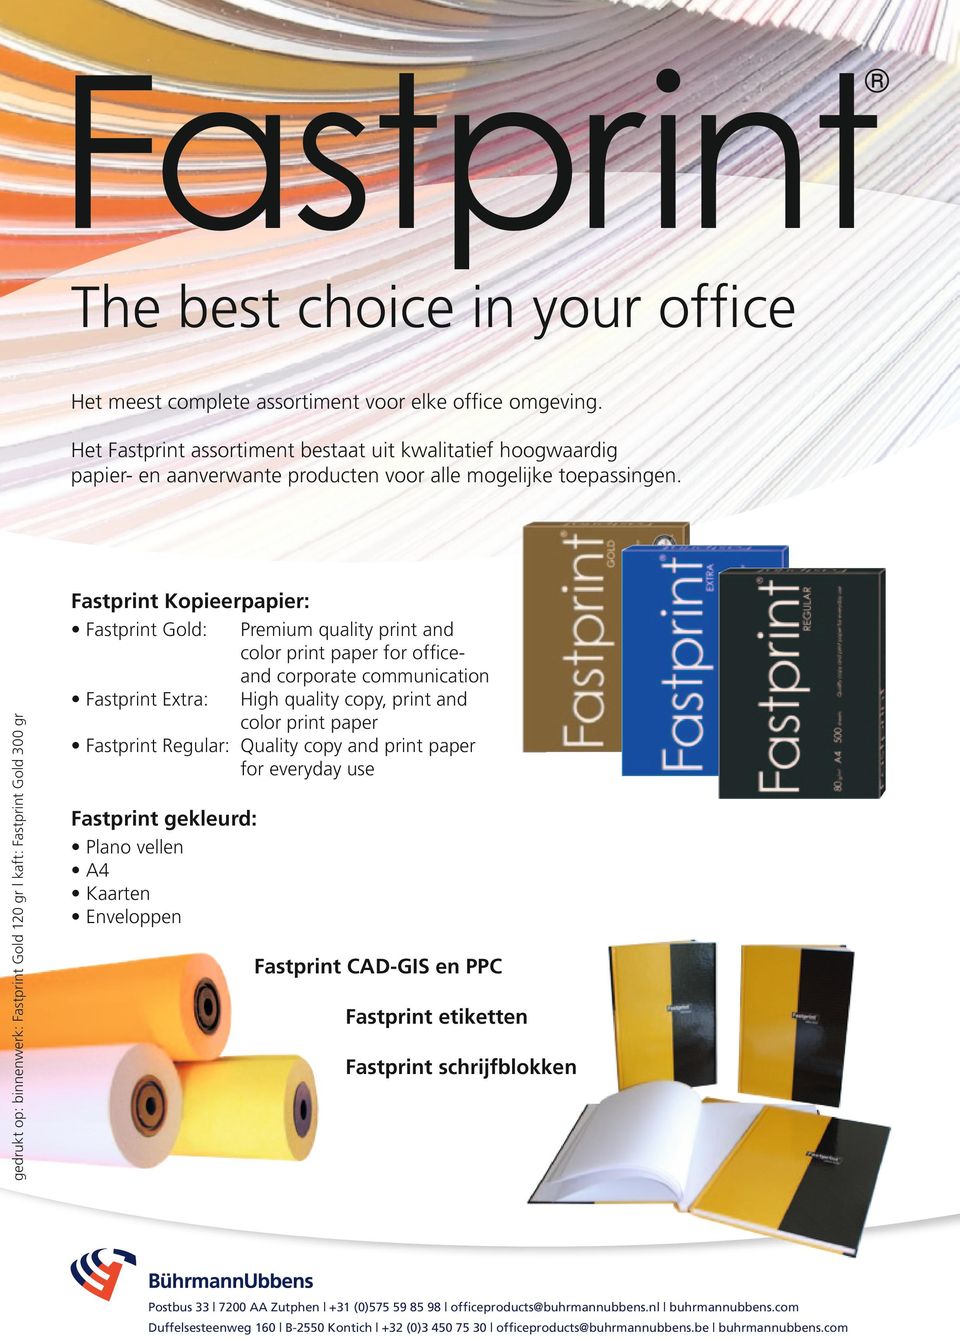 gedrukt op: binnenwerk: Fastprint Gold 0 gr kaft: Fastprint Gold 00 gr Fastprint Kopieerpapier: Fastprint Gold: Premium quality print and color print paper for office and corporate communication